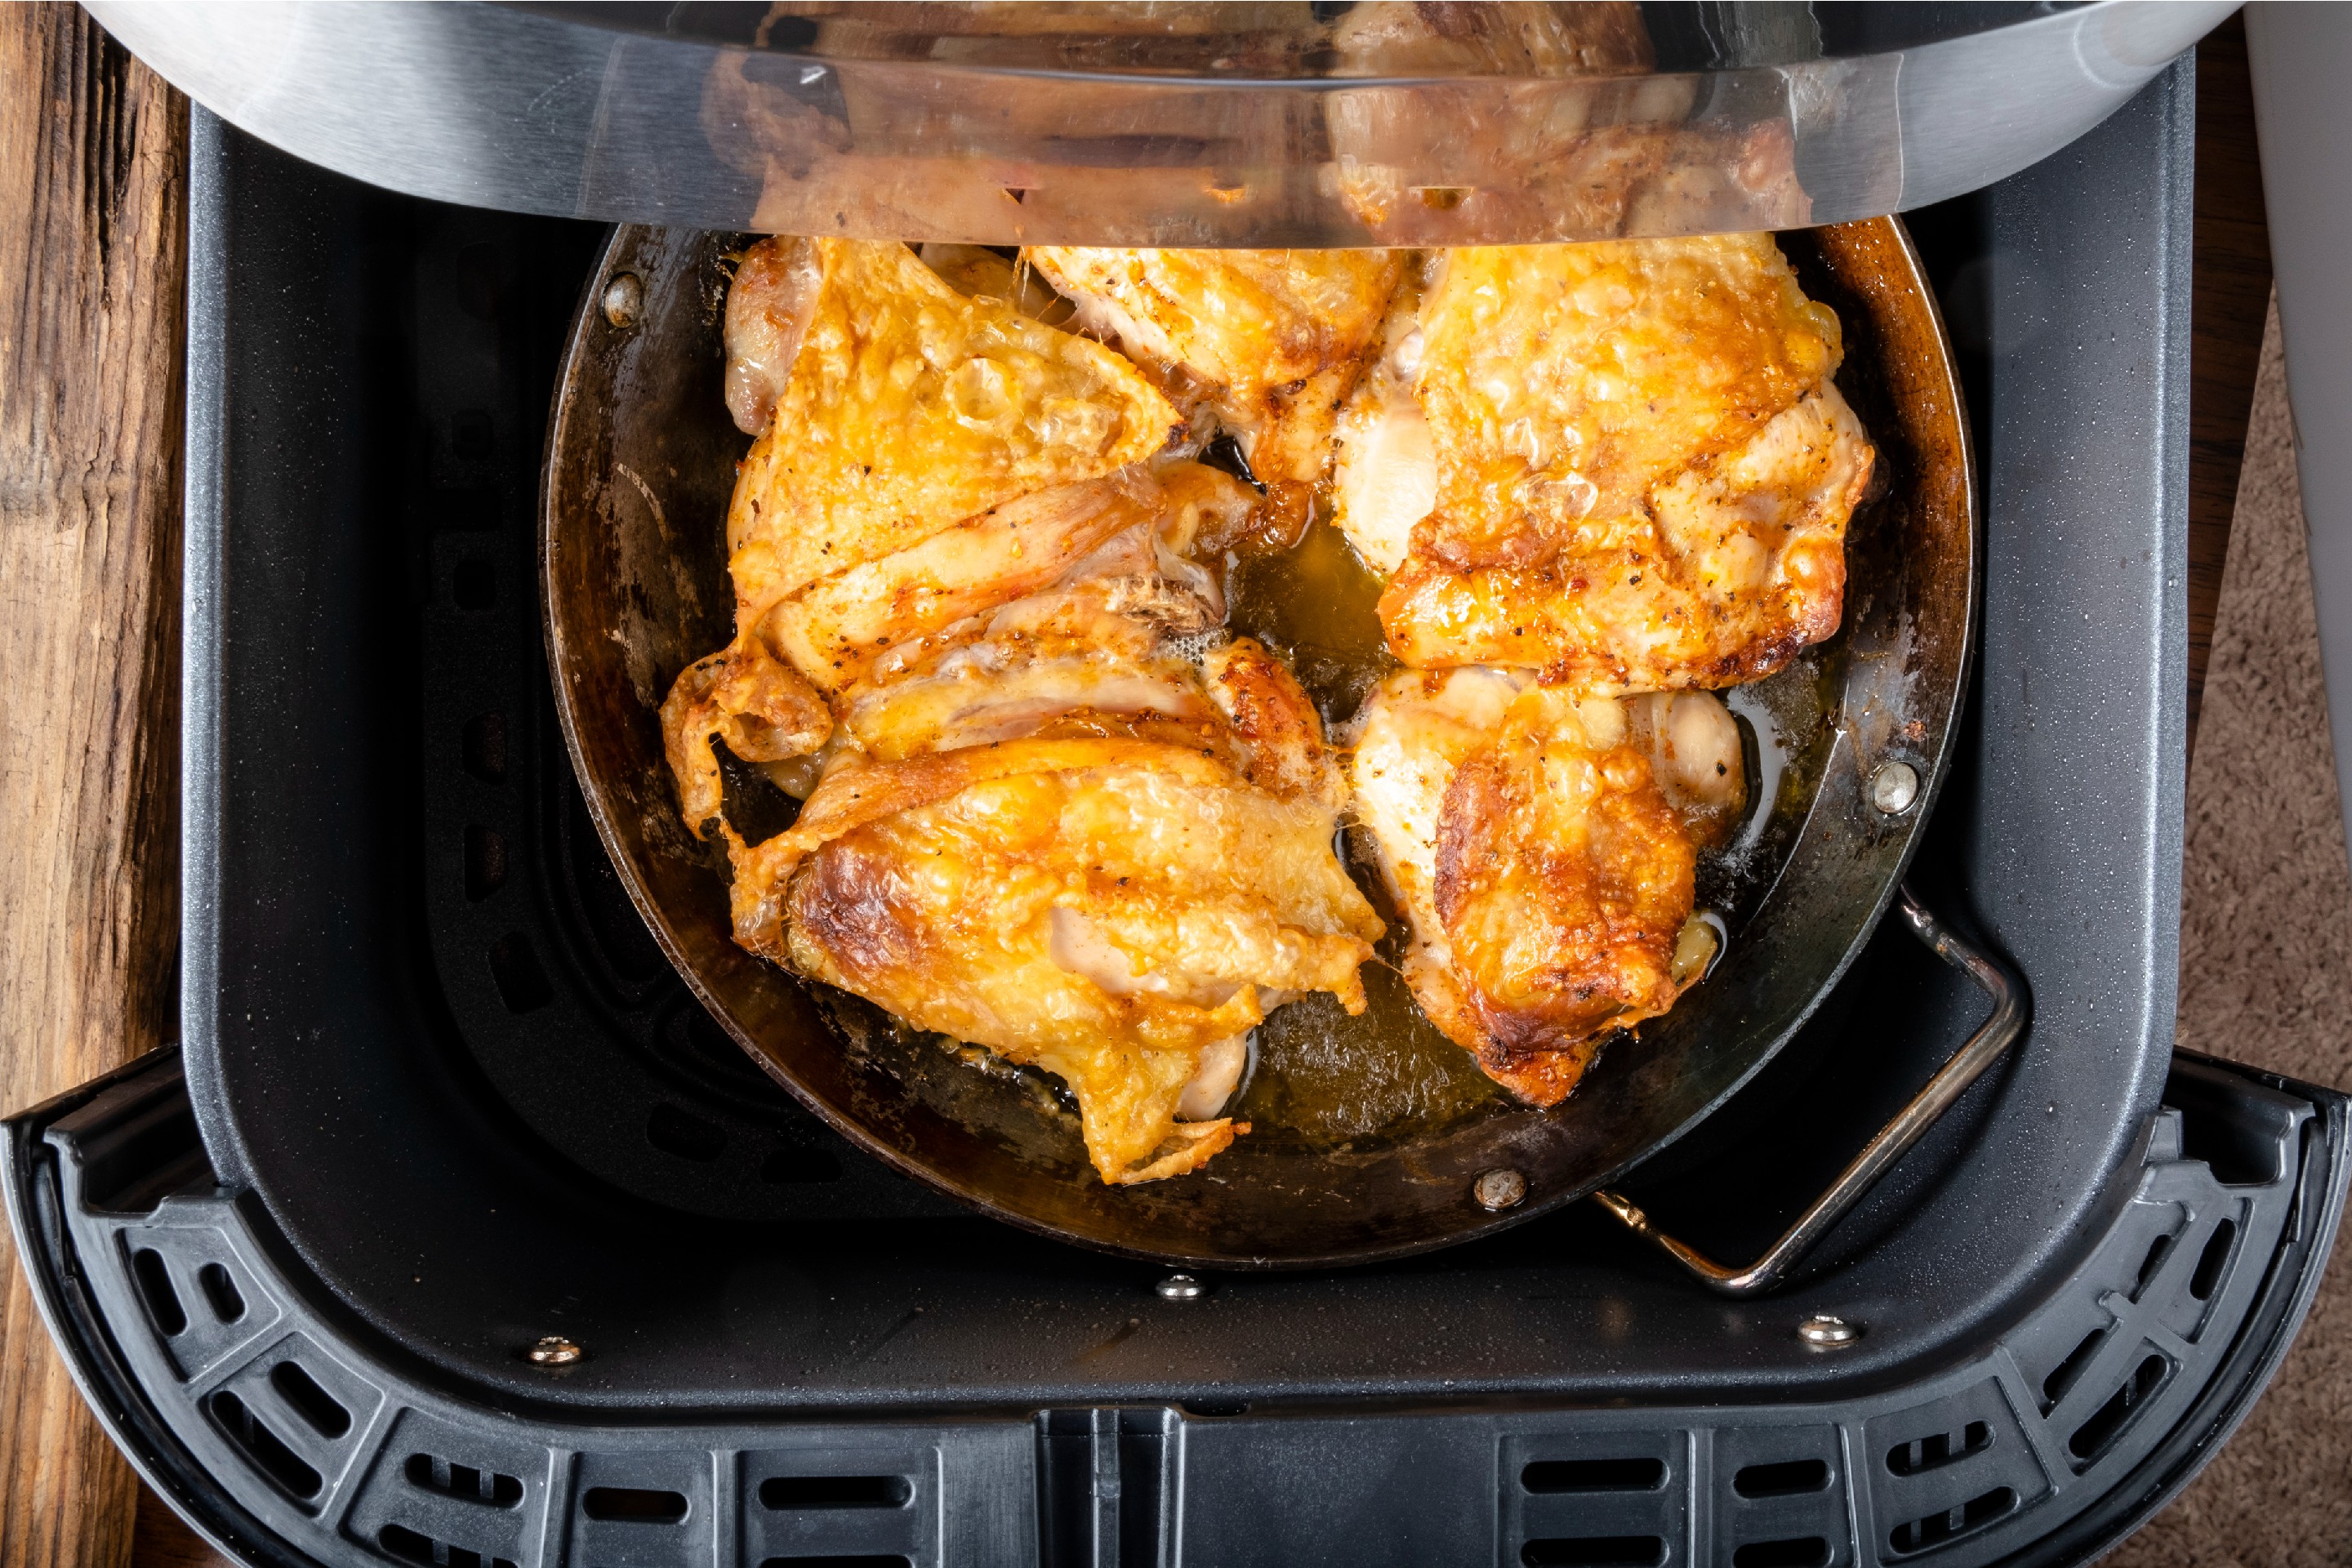 https://img.money.com/2023/05/shopping-air-fryer-sizes-a-complete-guide-to-choosing-the-right-size-fryer.jpg